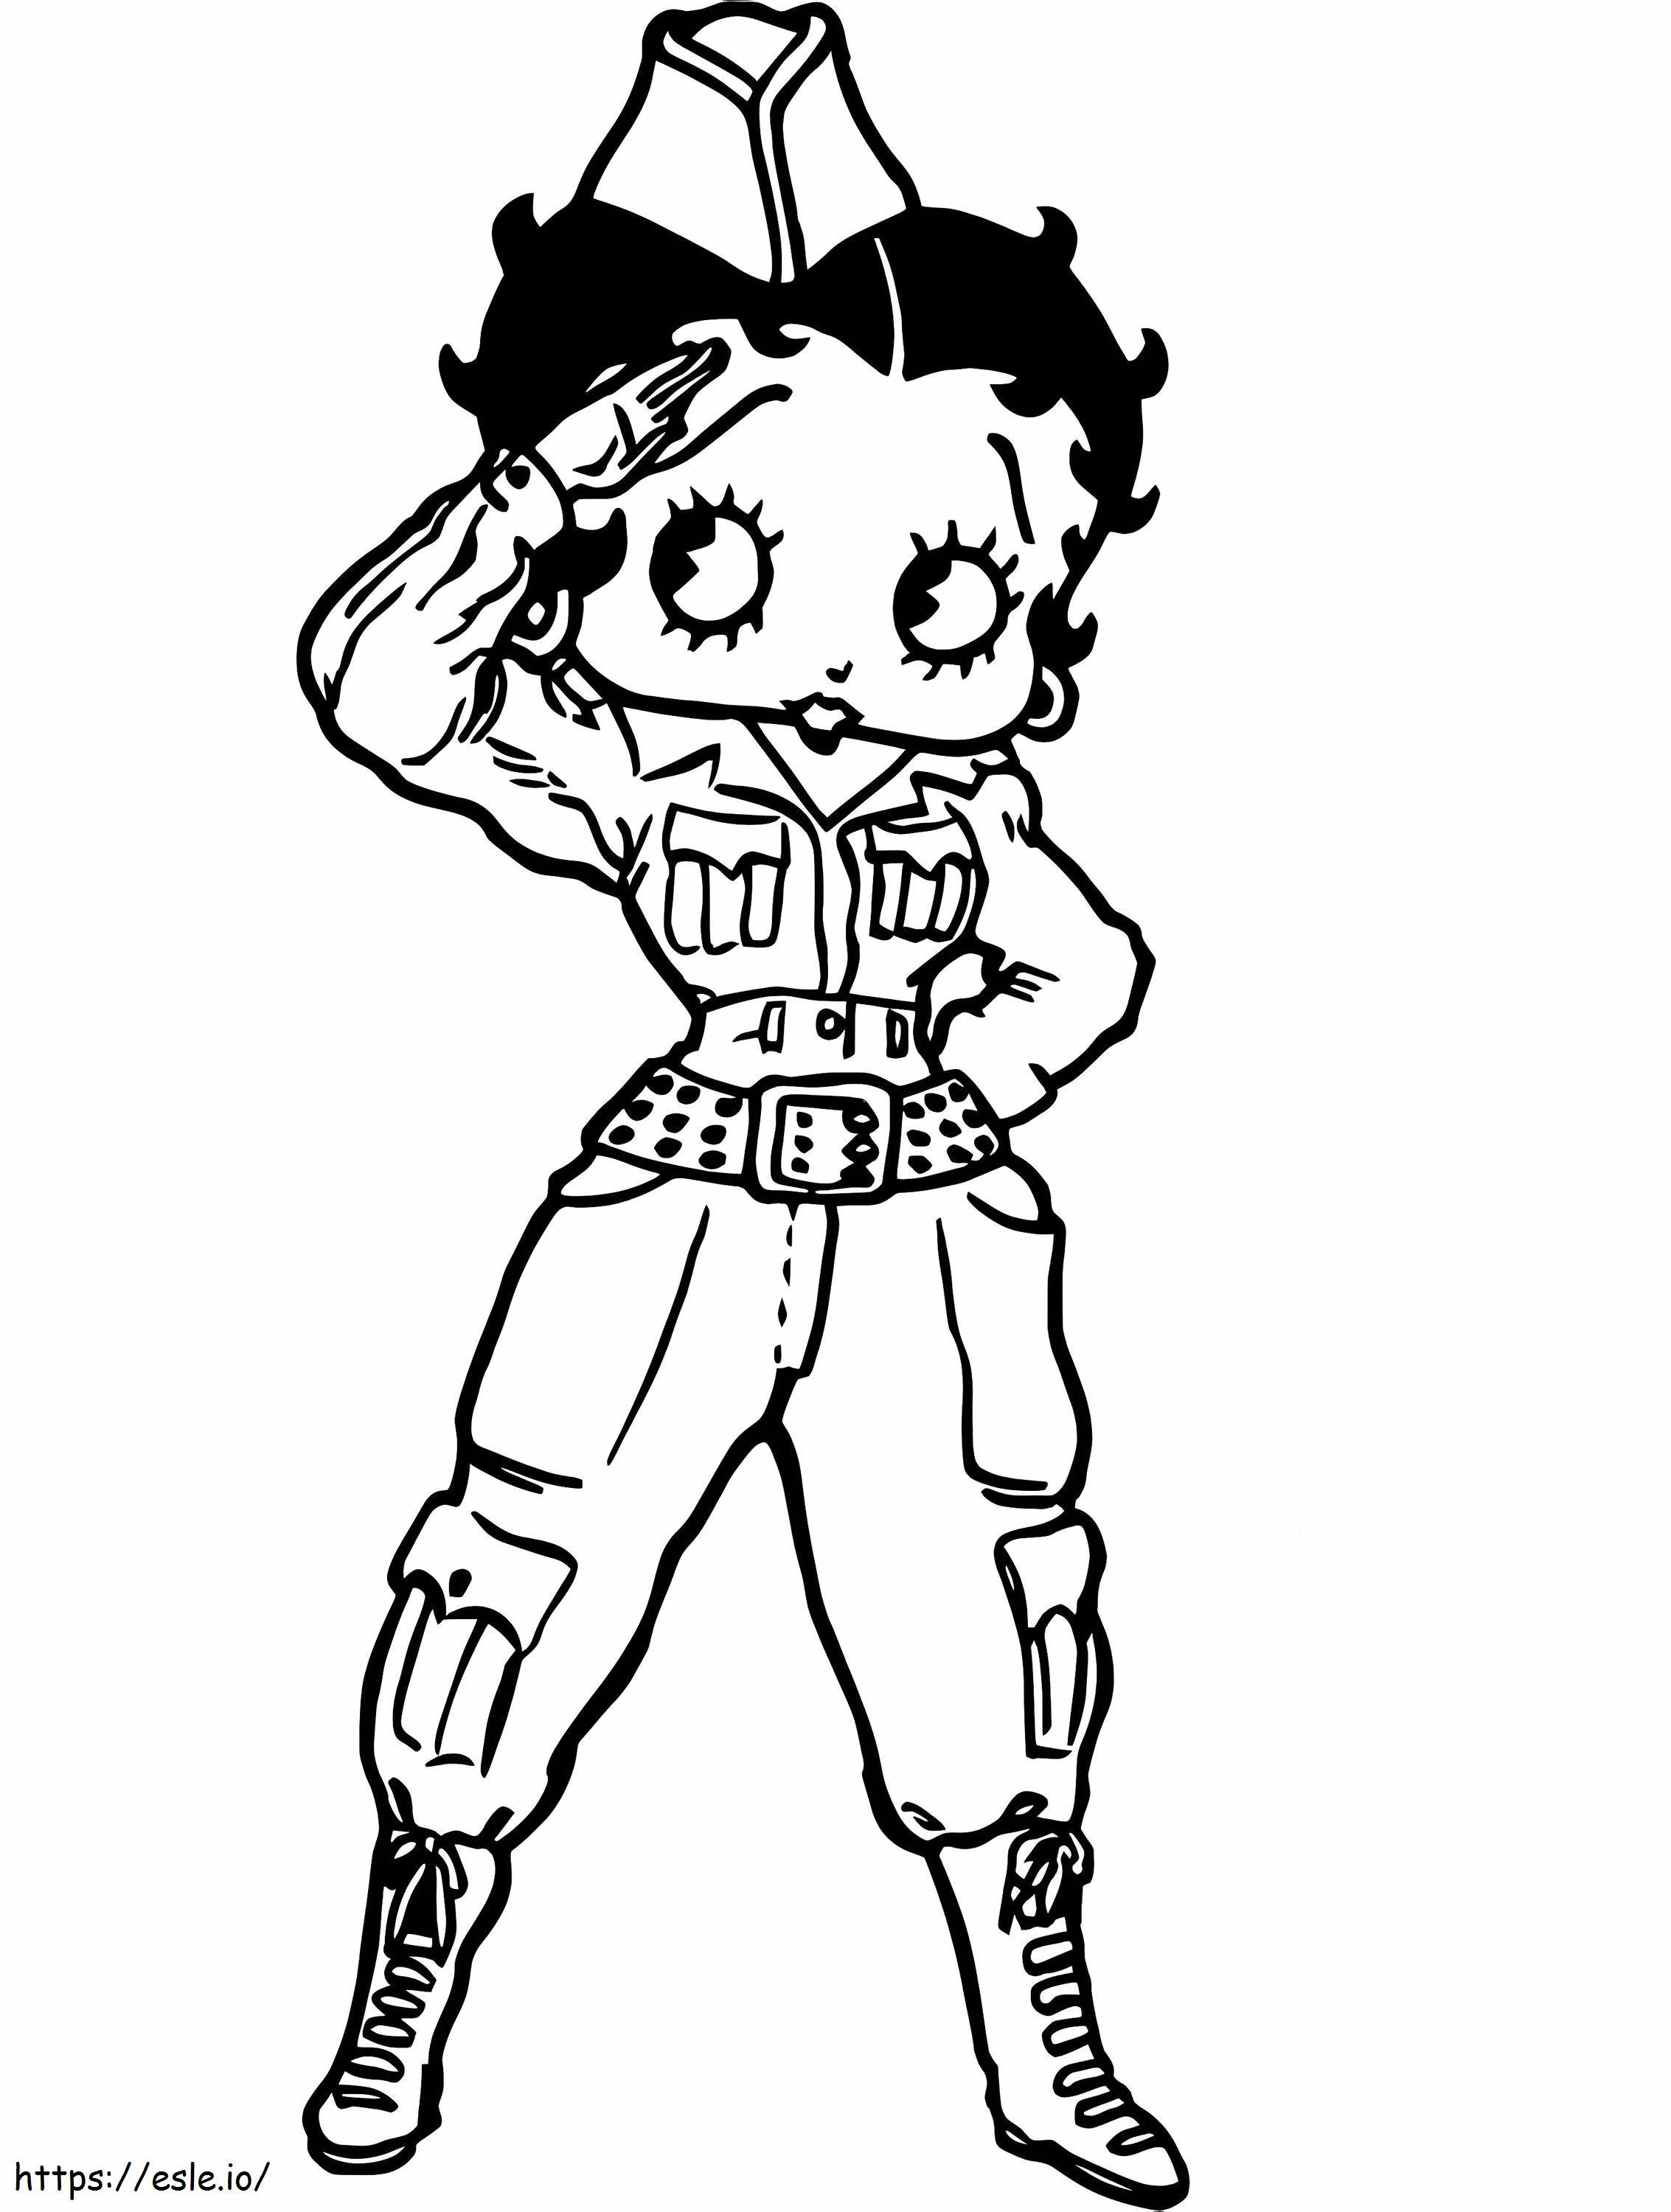 Soldier Betty Boop coloring page